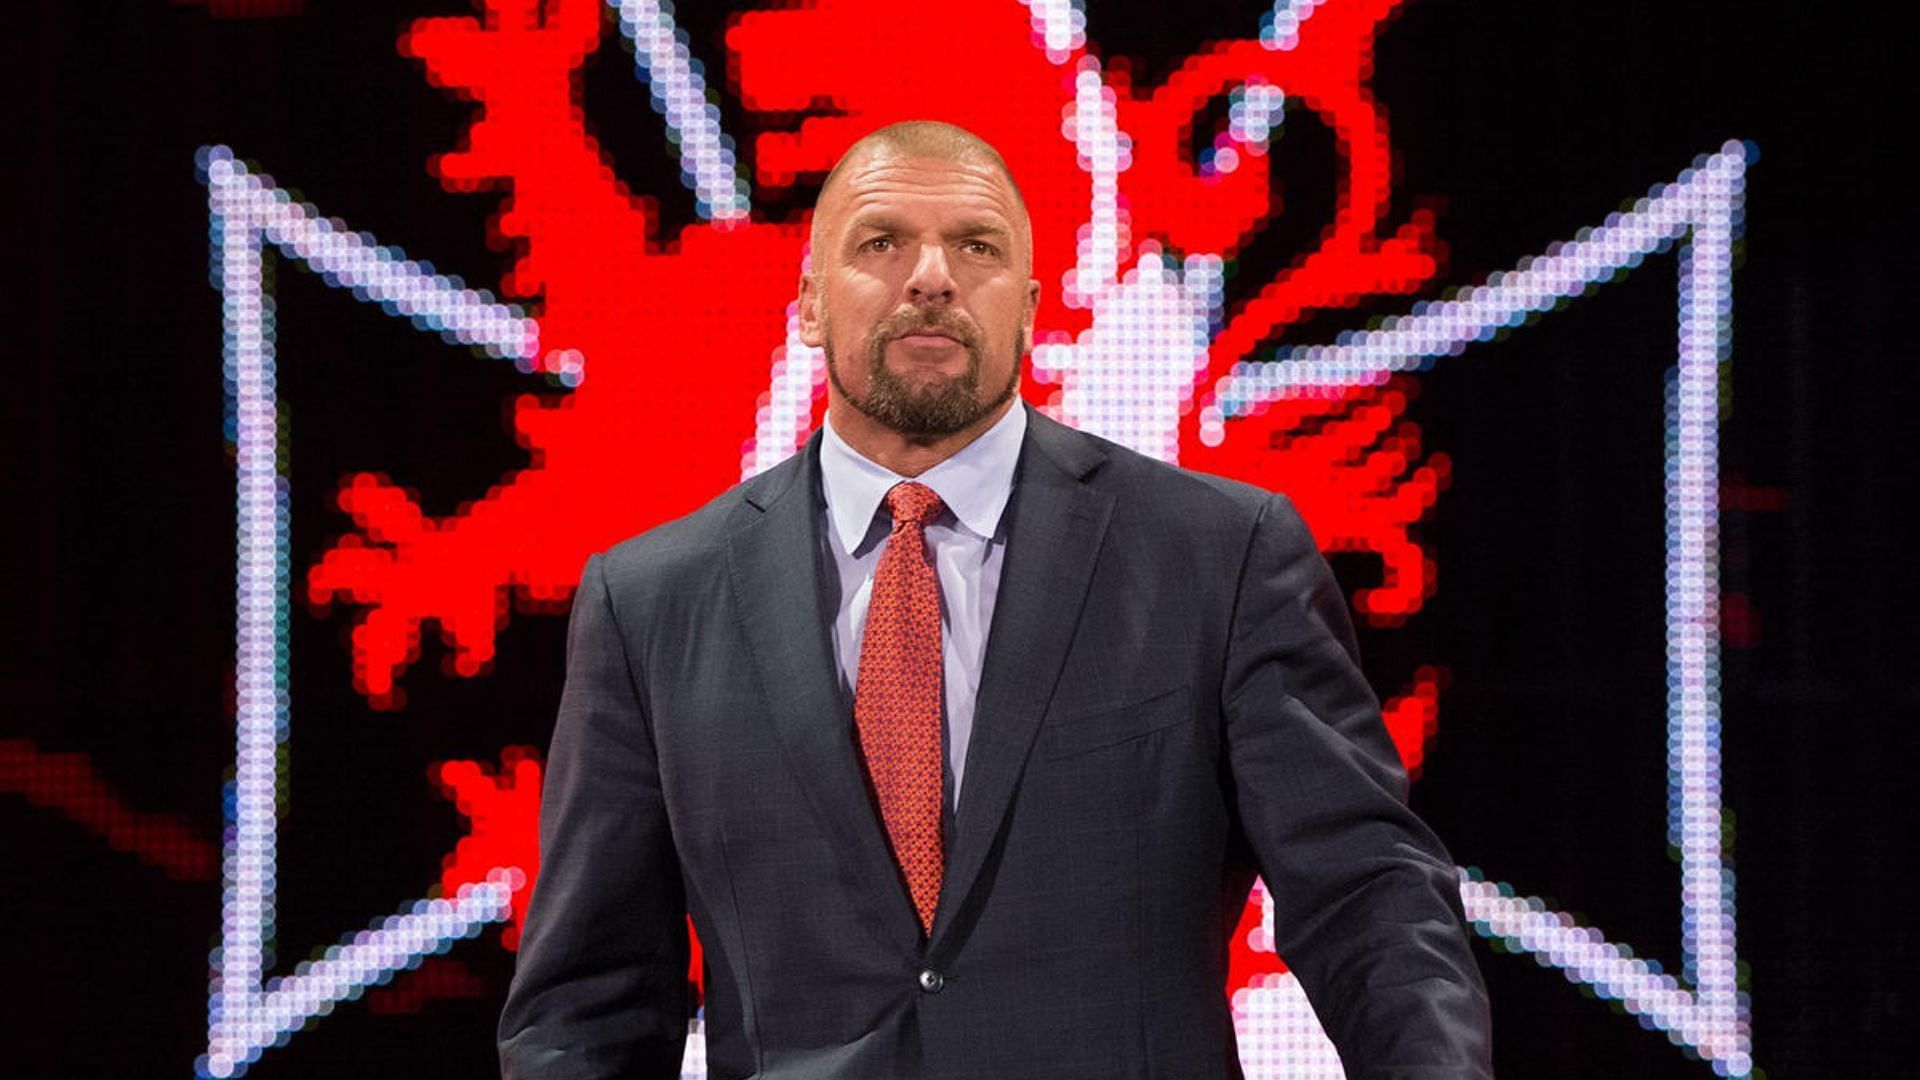 WWE may sign a new star under Triple H